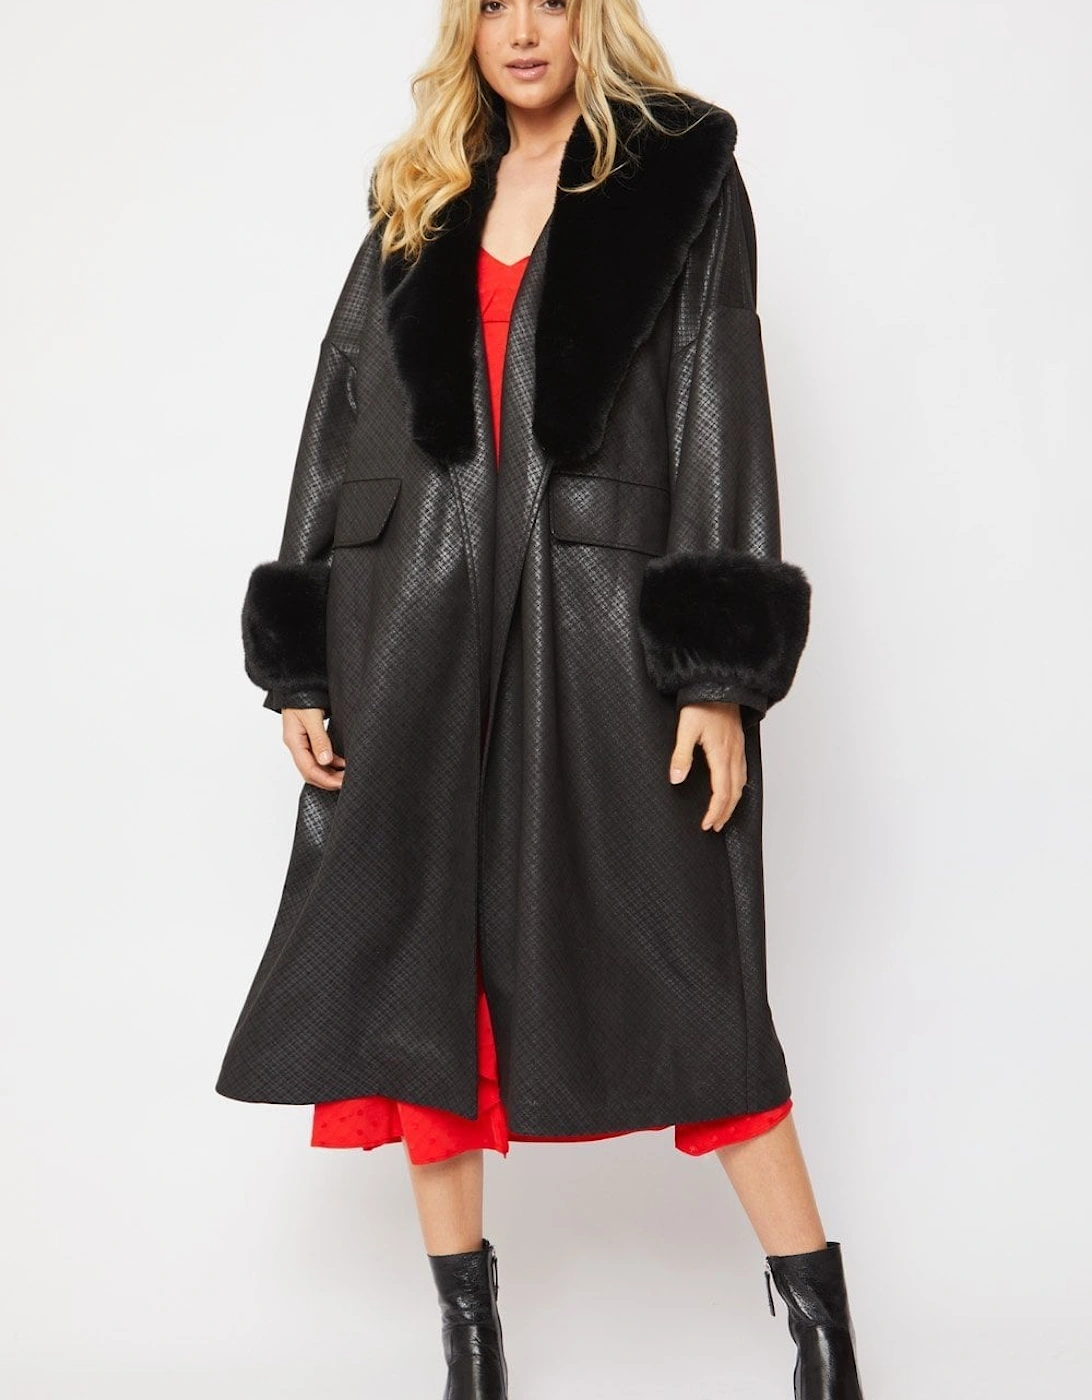 Black Oversized Faux Suede Jacket With Detachable Faux Fur Cuffs & Collar